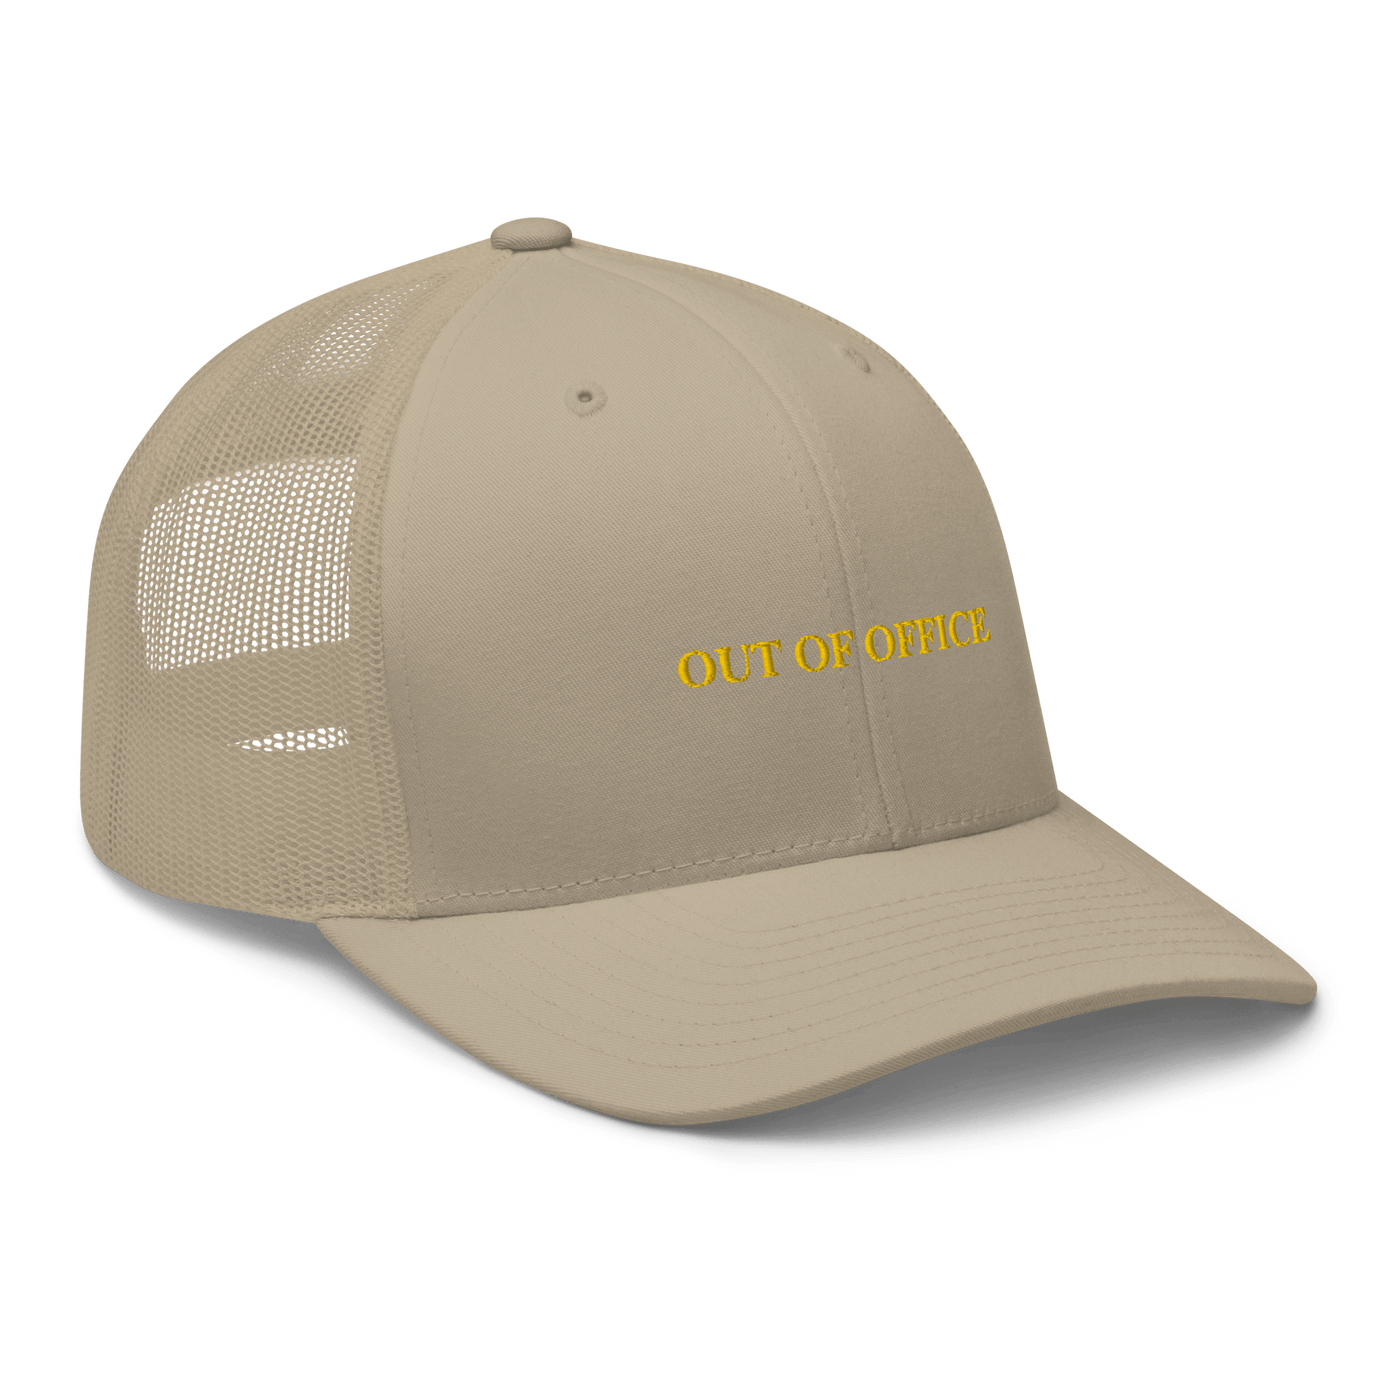 OUT OF OFFICE Trucker Cap - Khaki - - Just Another Cap Store